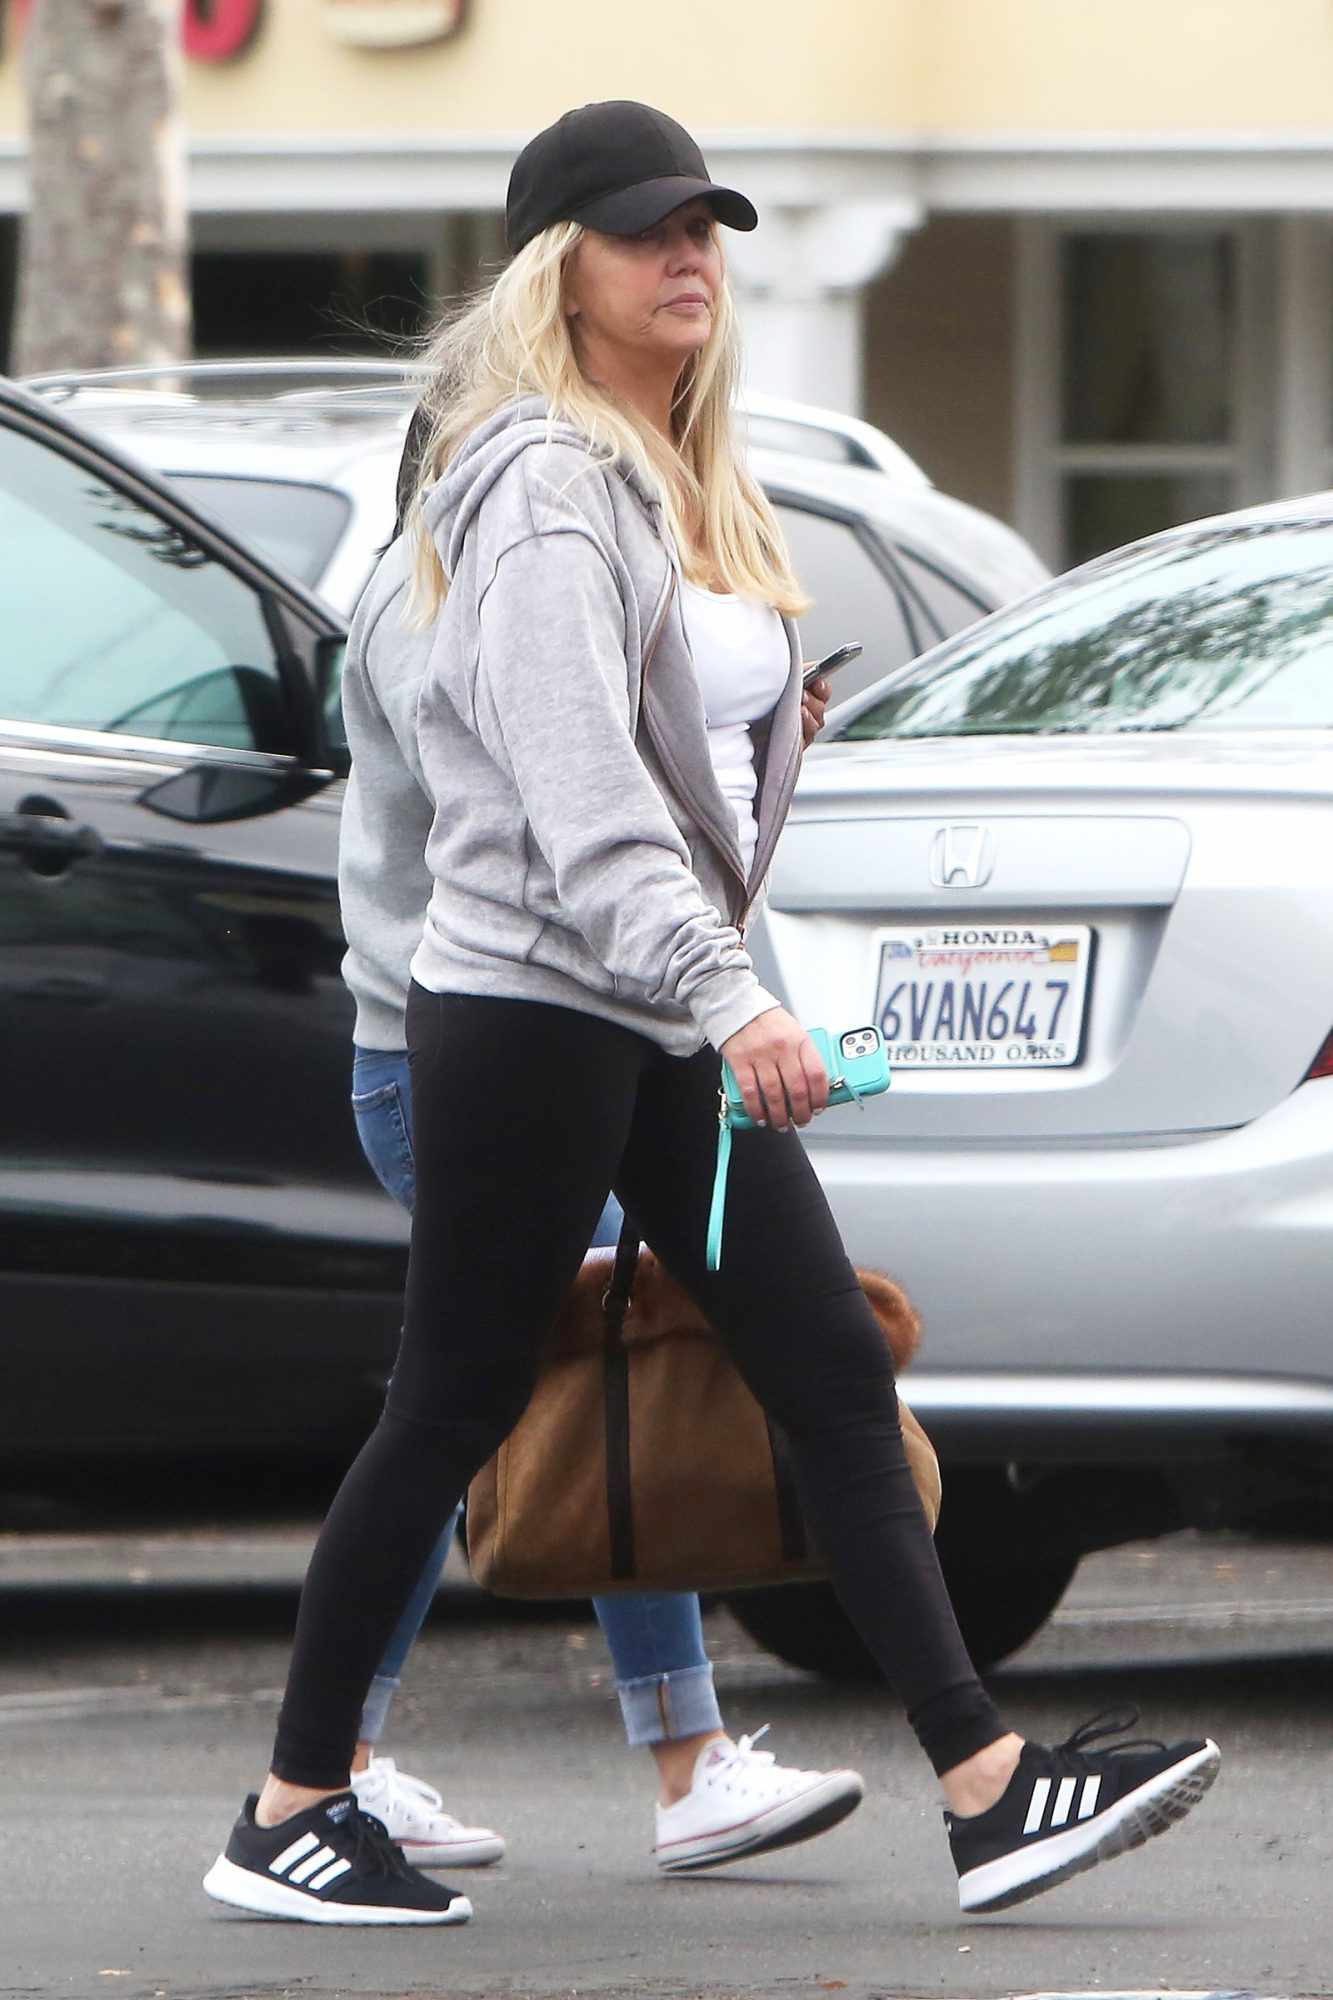 Heather Locklear seen running errands in Los Angeles, CA. She stopped to do some Christmas shopping and stepped out while face-timing someone while her assistant did the shopping after that she stopped to pharmacy store to pick up some pills. 03 Dec 2019